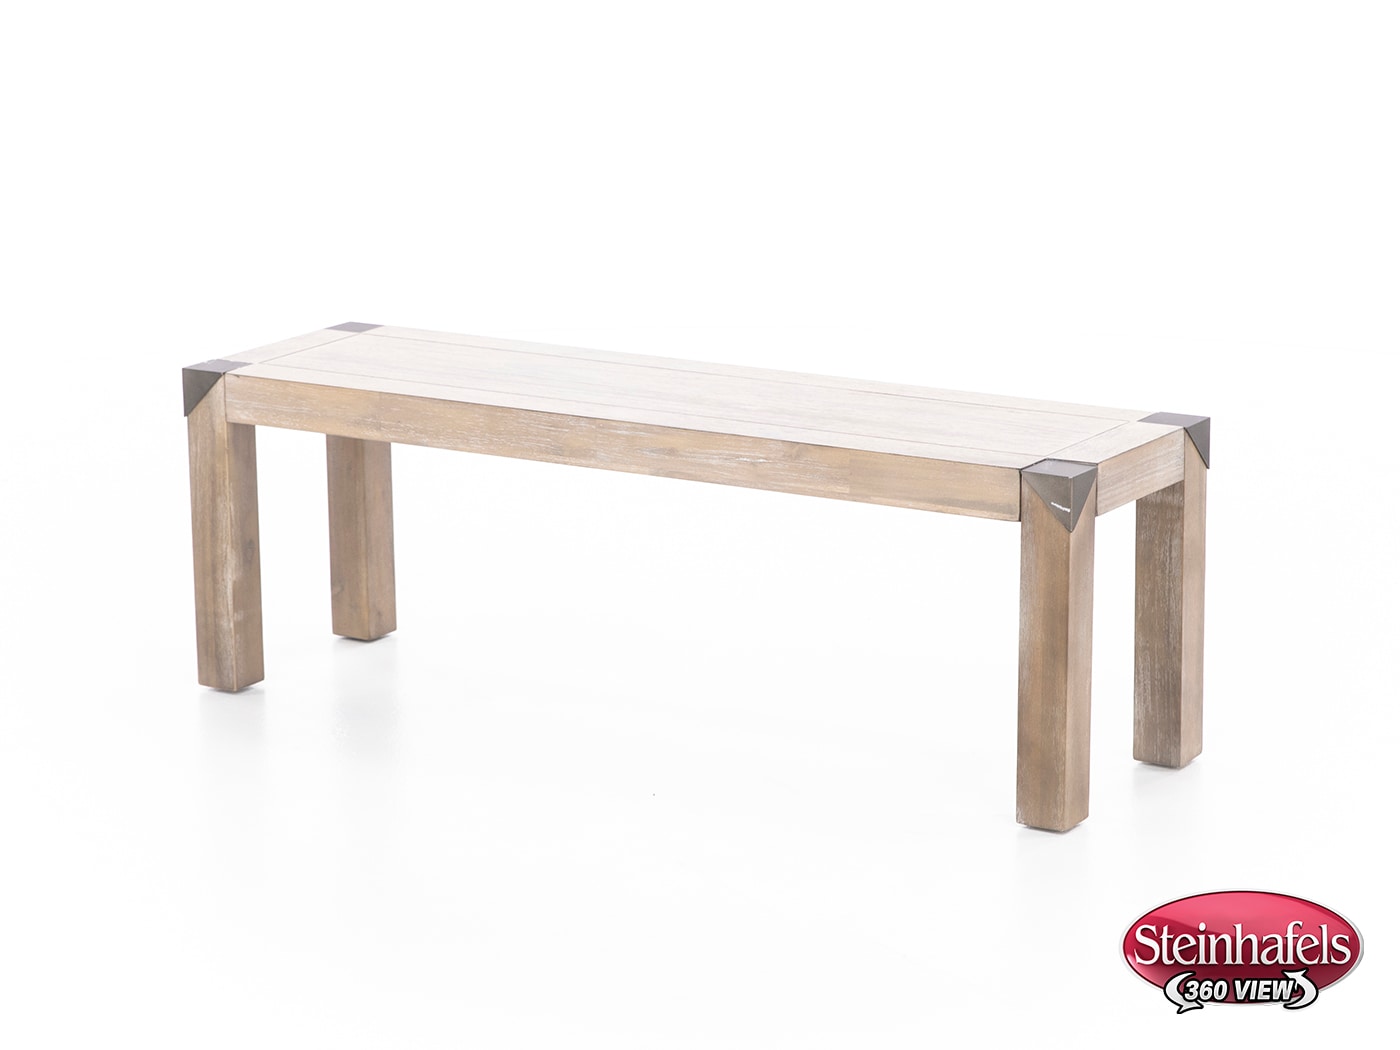 magp brown inch standard seat height bench  image   